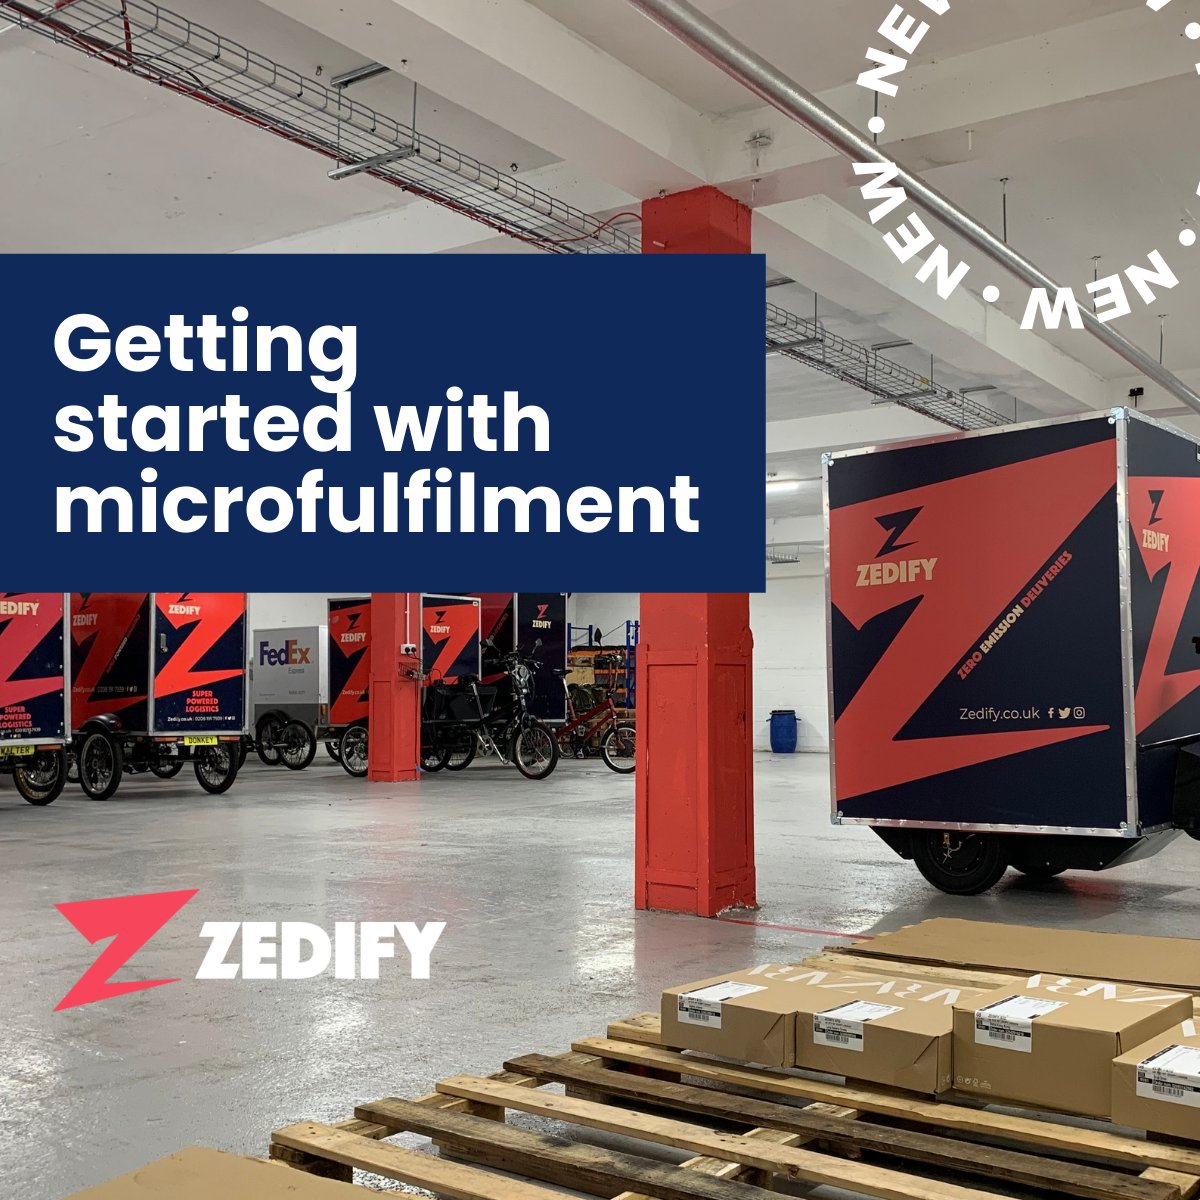 A couple of years ago, waiting a week for an online delivery was normal. Now, anything other than next-day seems 'slow'. Luckily, being able to ship parcels quickly is an inbuilt benefit of the Zedify cargo bike model. The key? 🔑 Micro-consolidation: eu1.hubs.ly/H06X2sm0